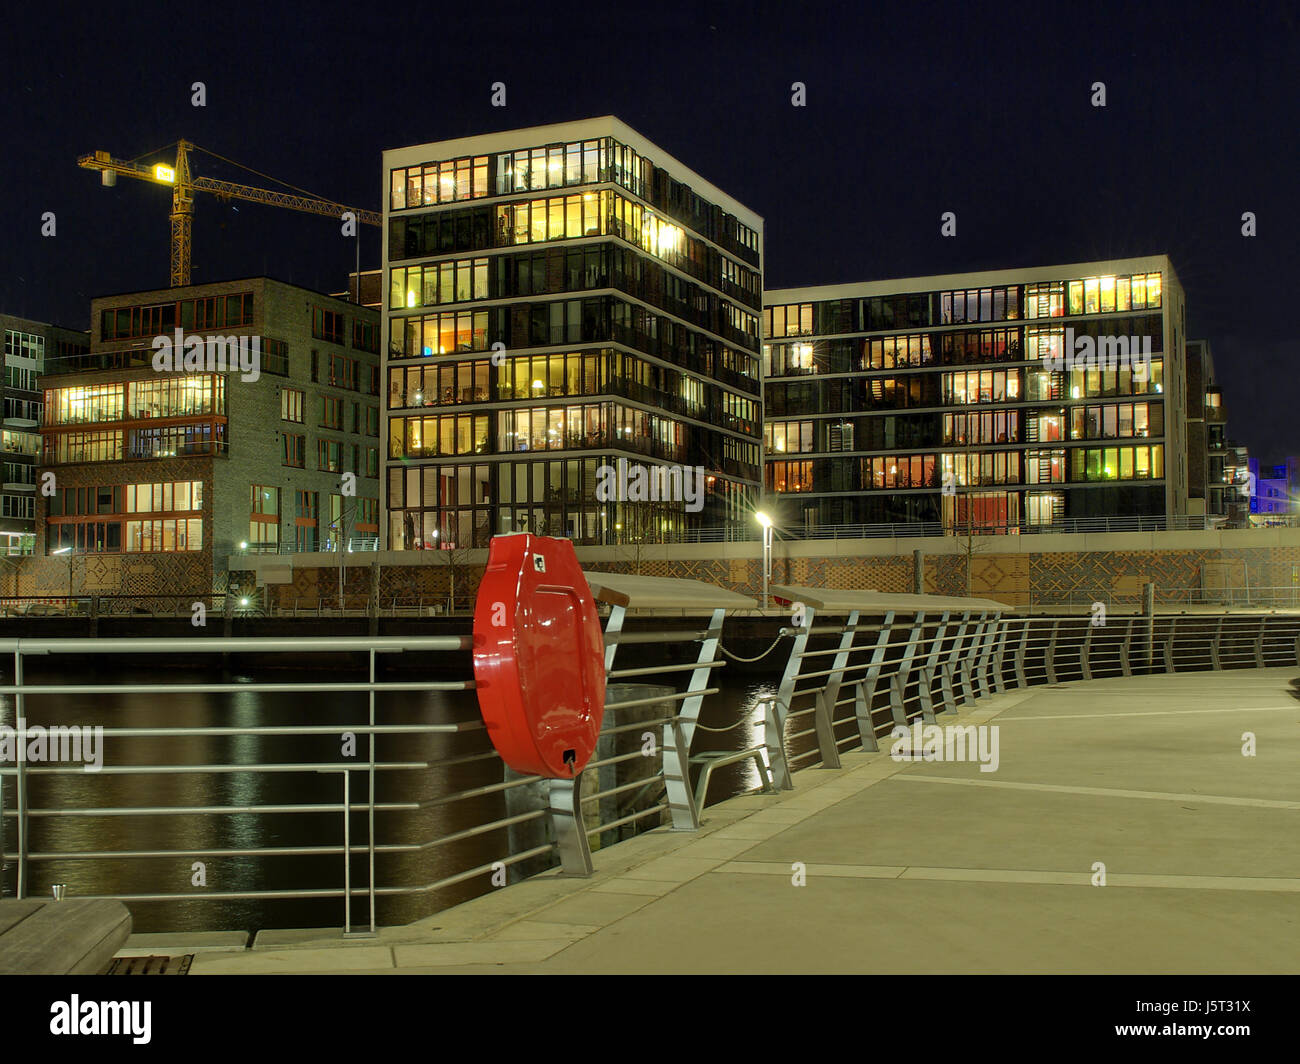 nocturnal hafencity Stock Photo